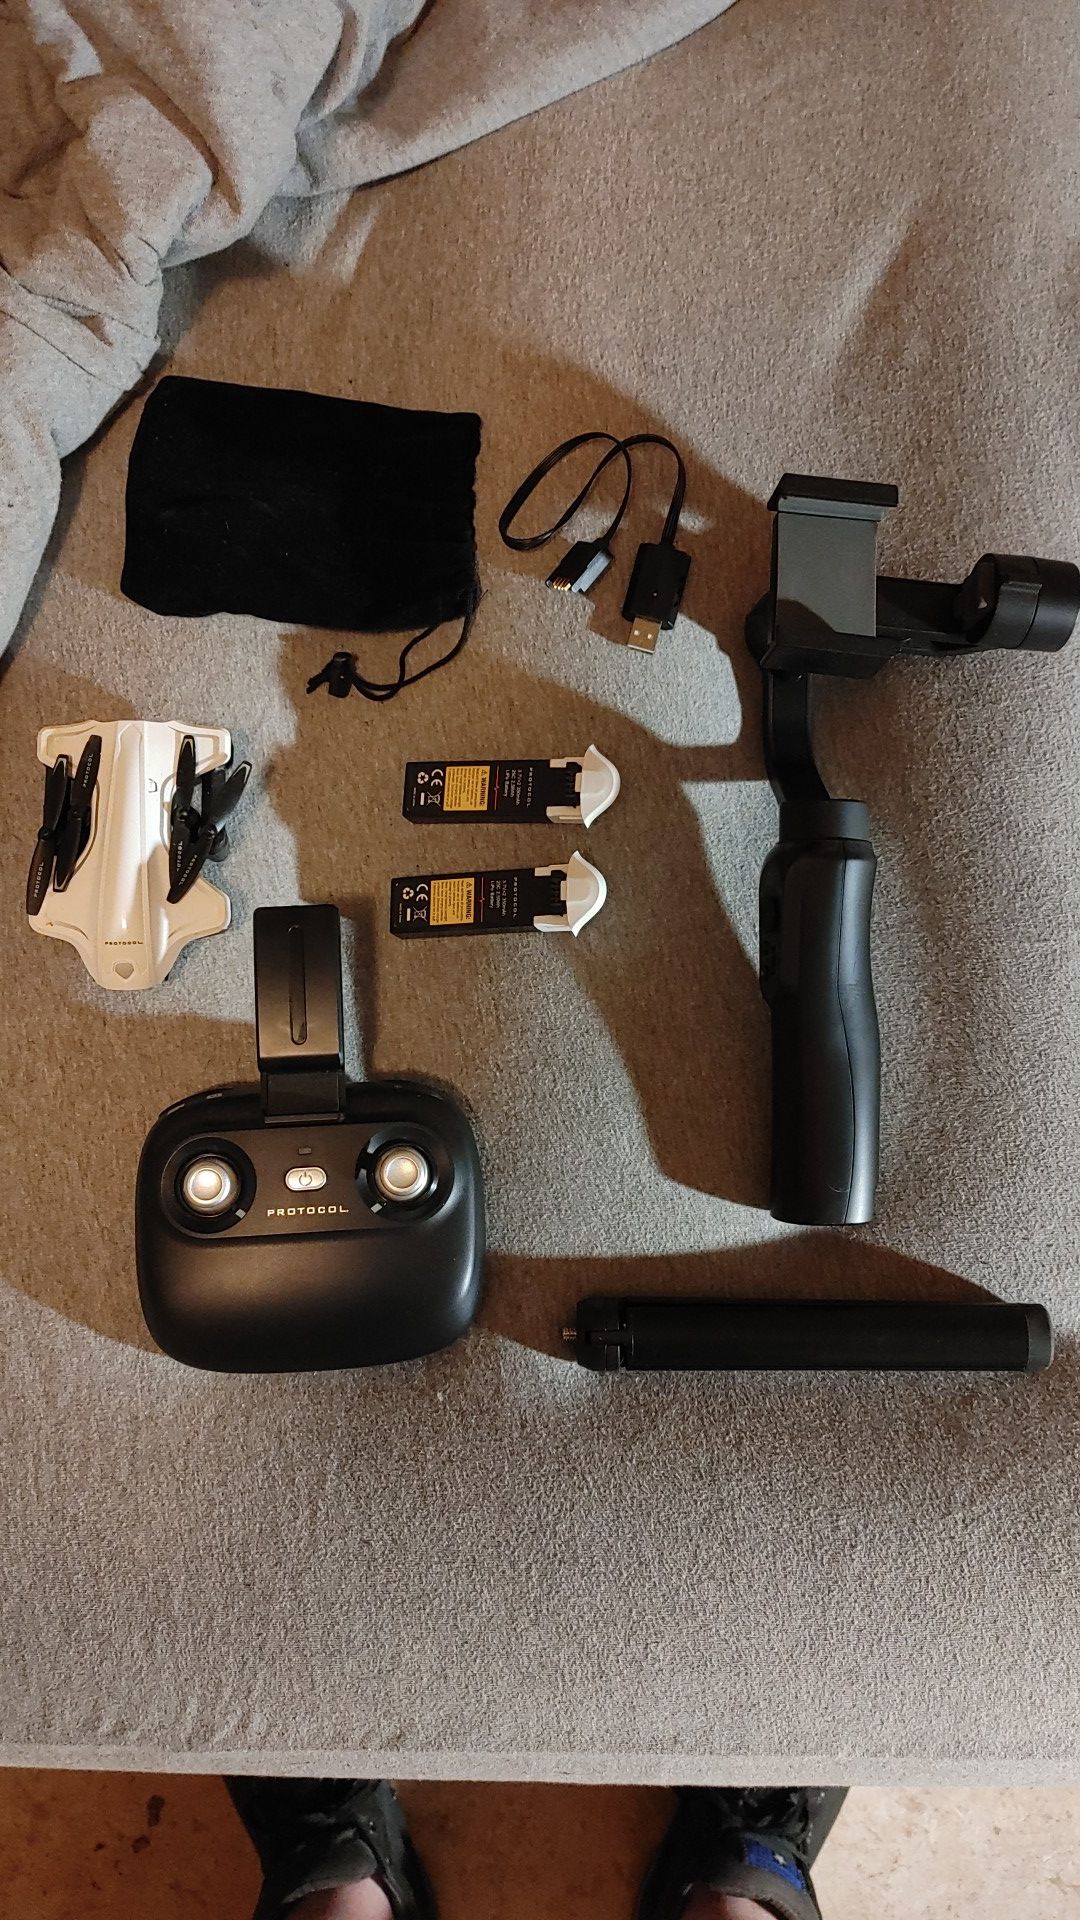 Protocol drone with batteries/carrying case and smart phone gimbal with stand